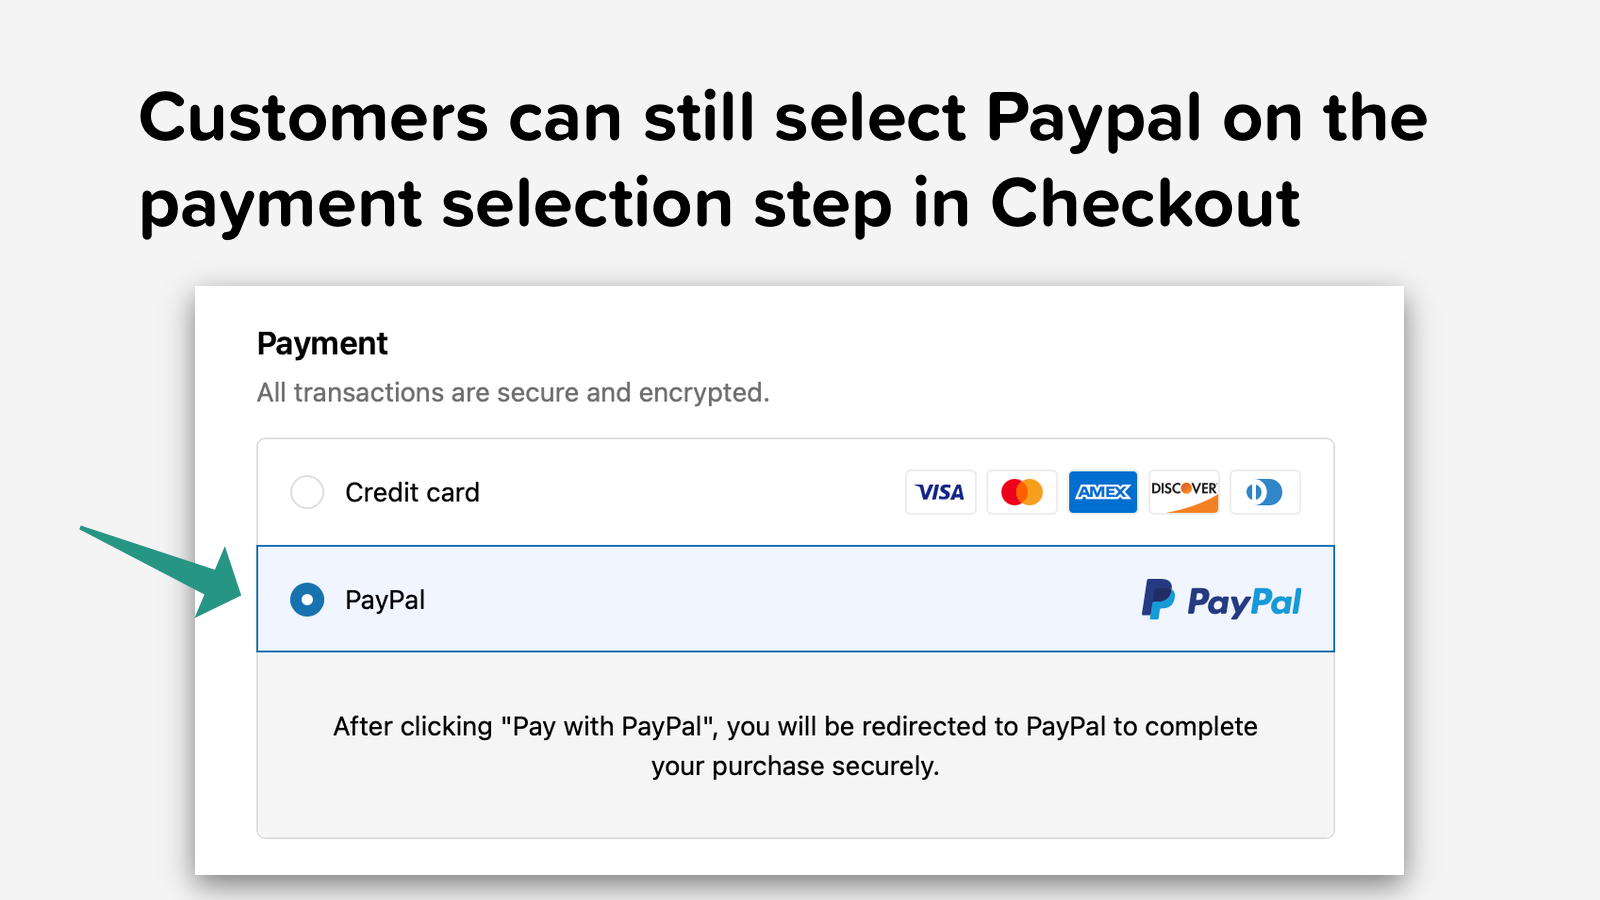 Customers can still select Paypal in the payment selection step